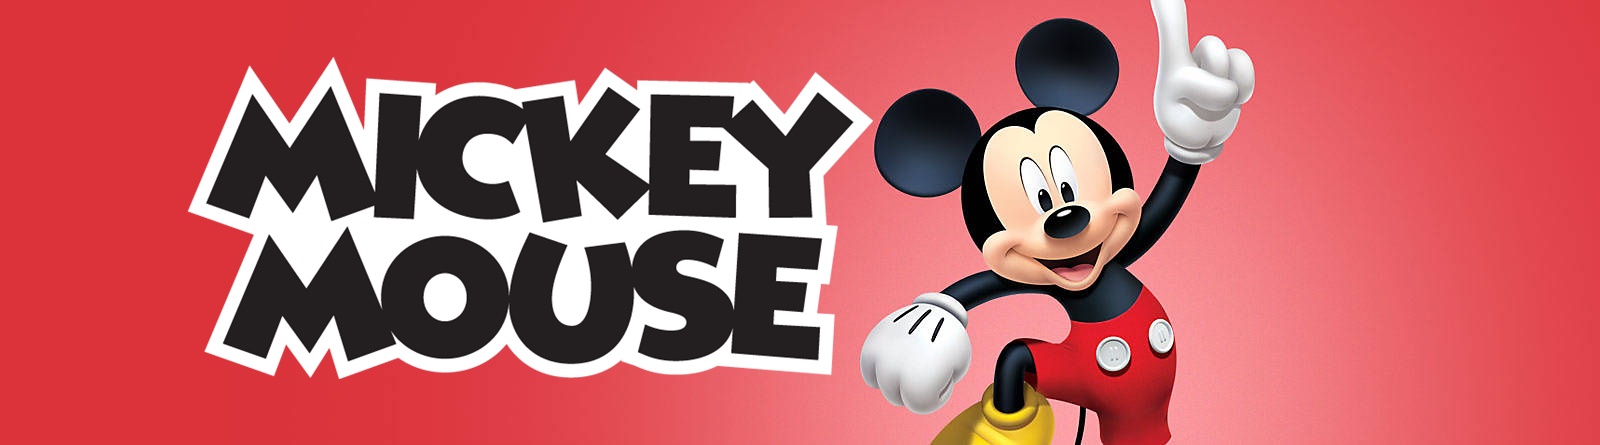 Wholesale Mickey Mouse Products Europe  Manufacturer and Distributor Disney  - Storline